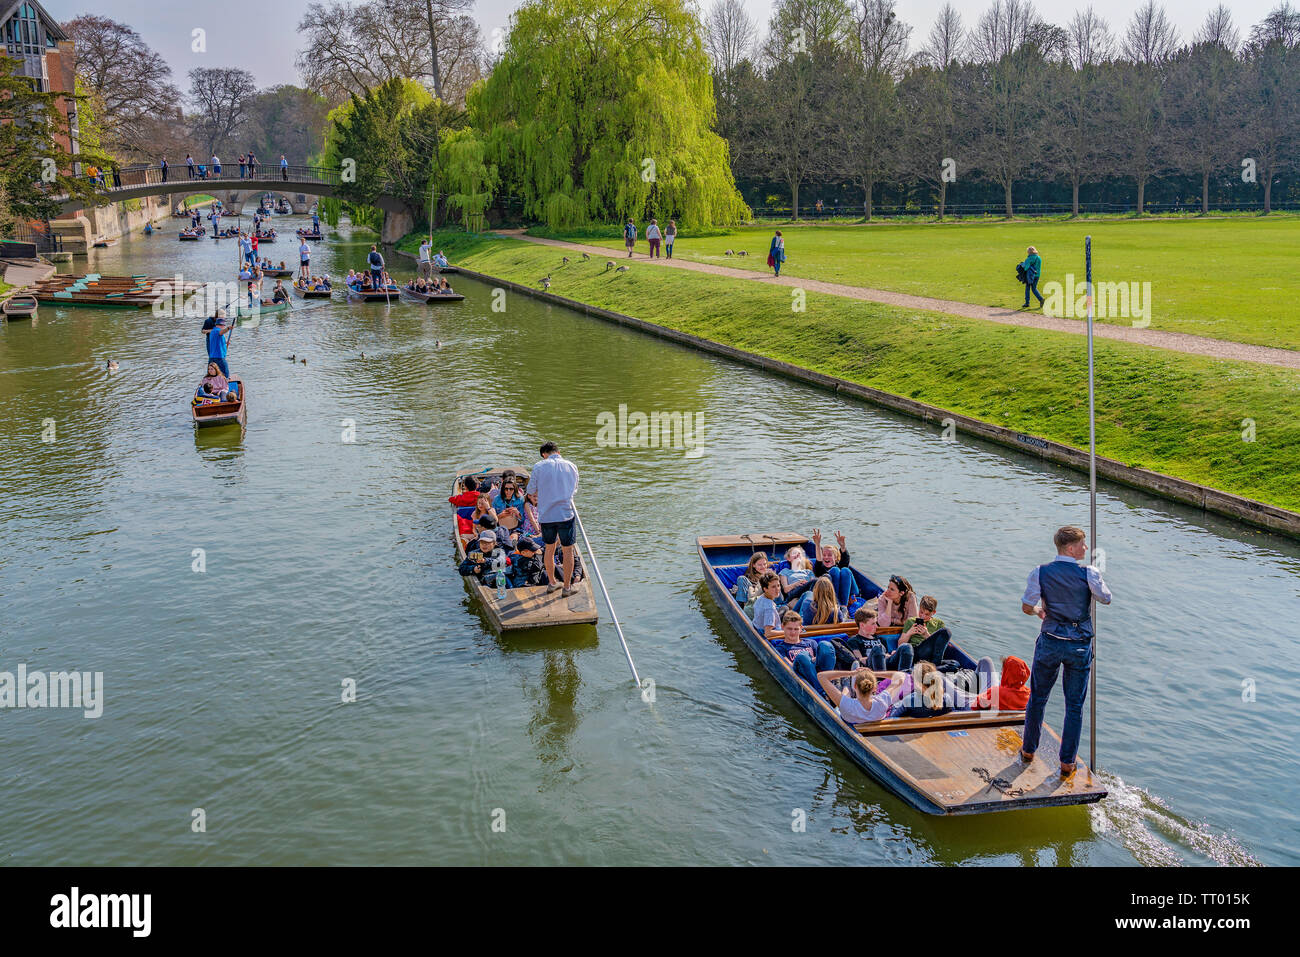 CAMBRIDGE, UNITED KINGDOM - APRIL 18: View of traditional Punt boats outside Trinity College on the River Cam on April 18, 2019 Stock Photo